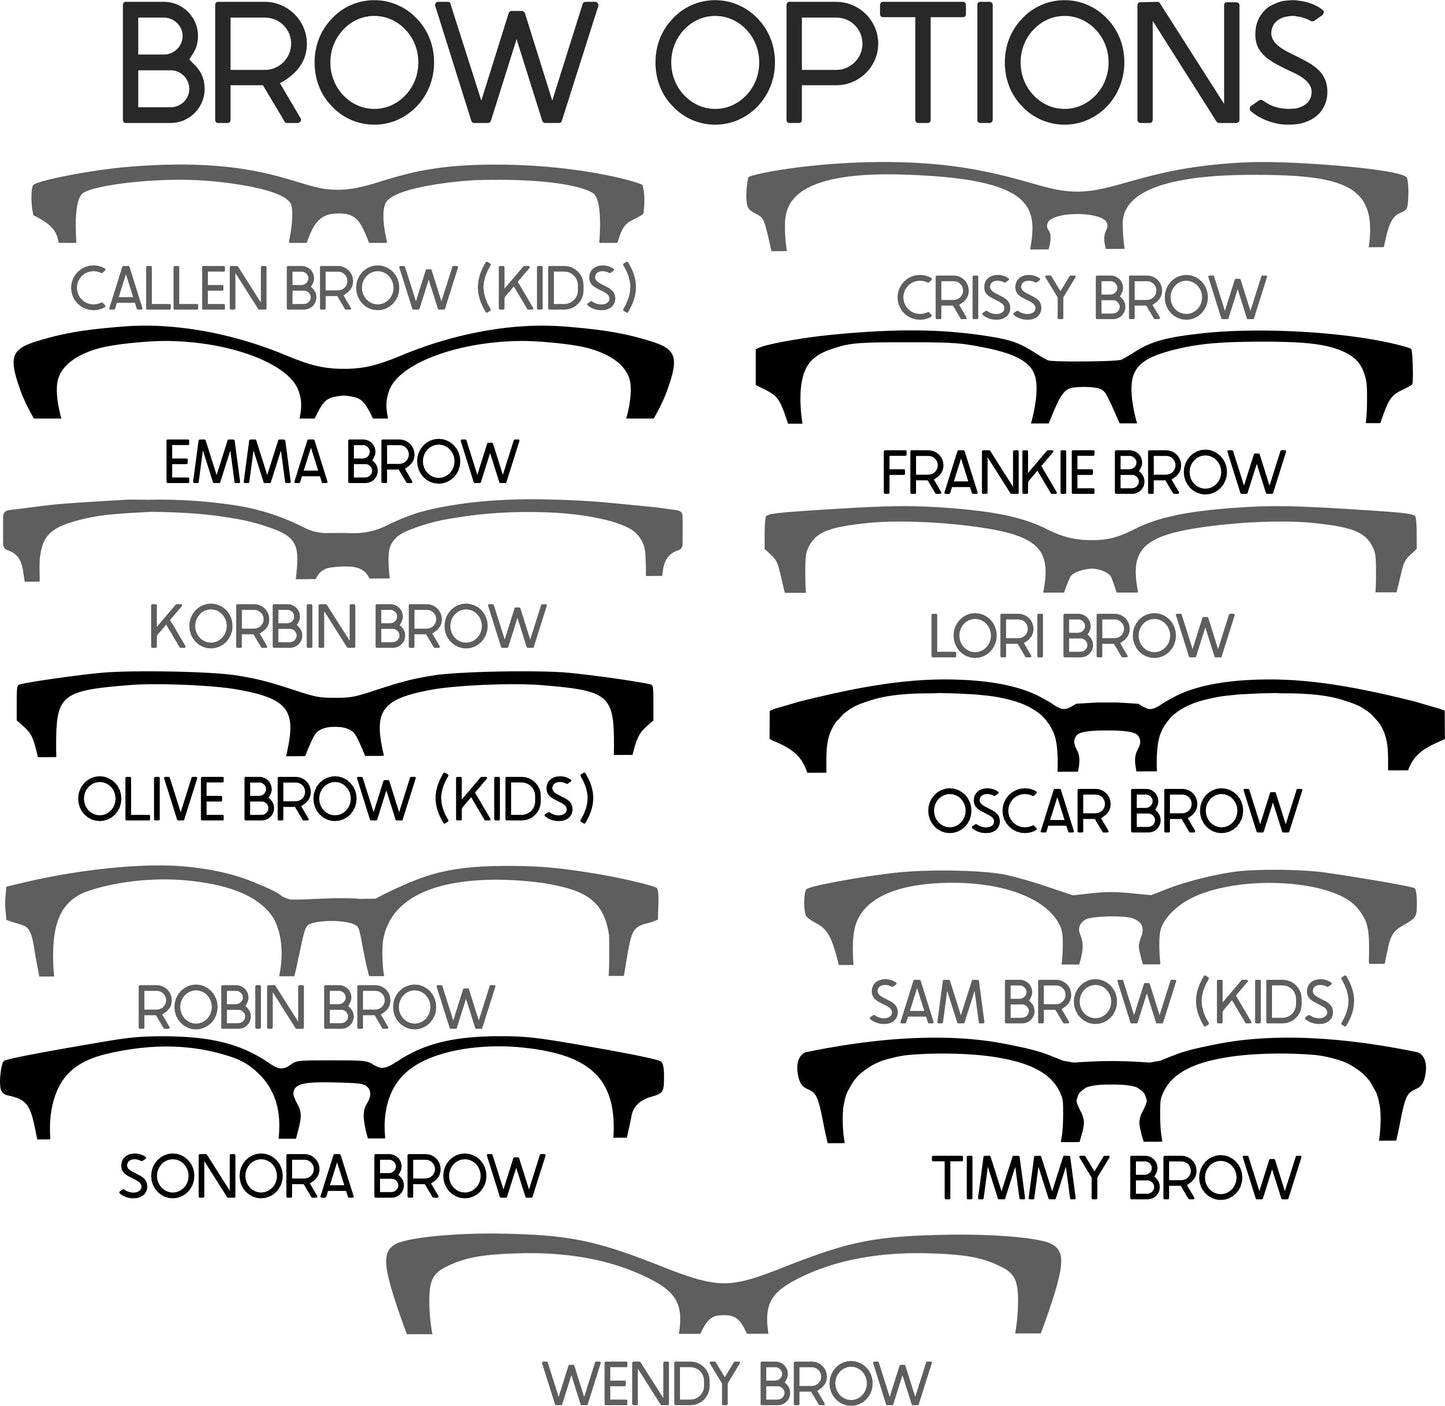 HAIR MIXING BOWL DYE BRUSH Eyewear Frame Toppers COMES WITH MAGNETS